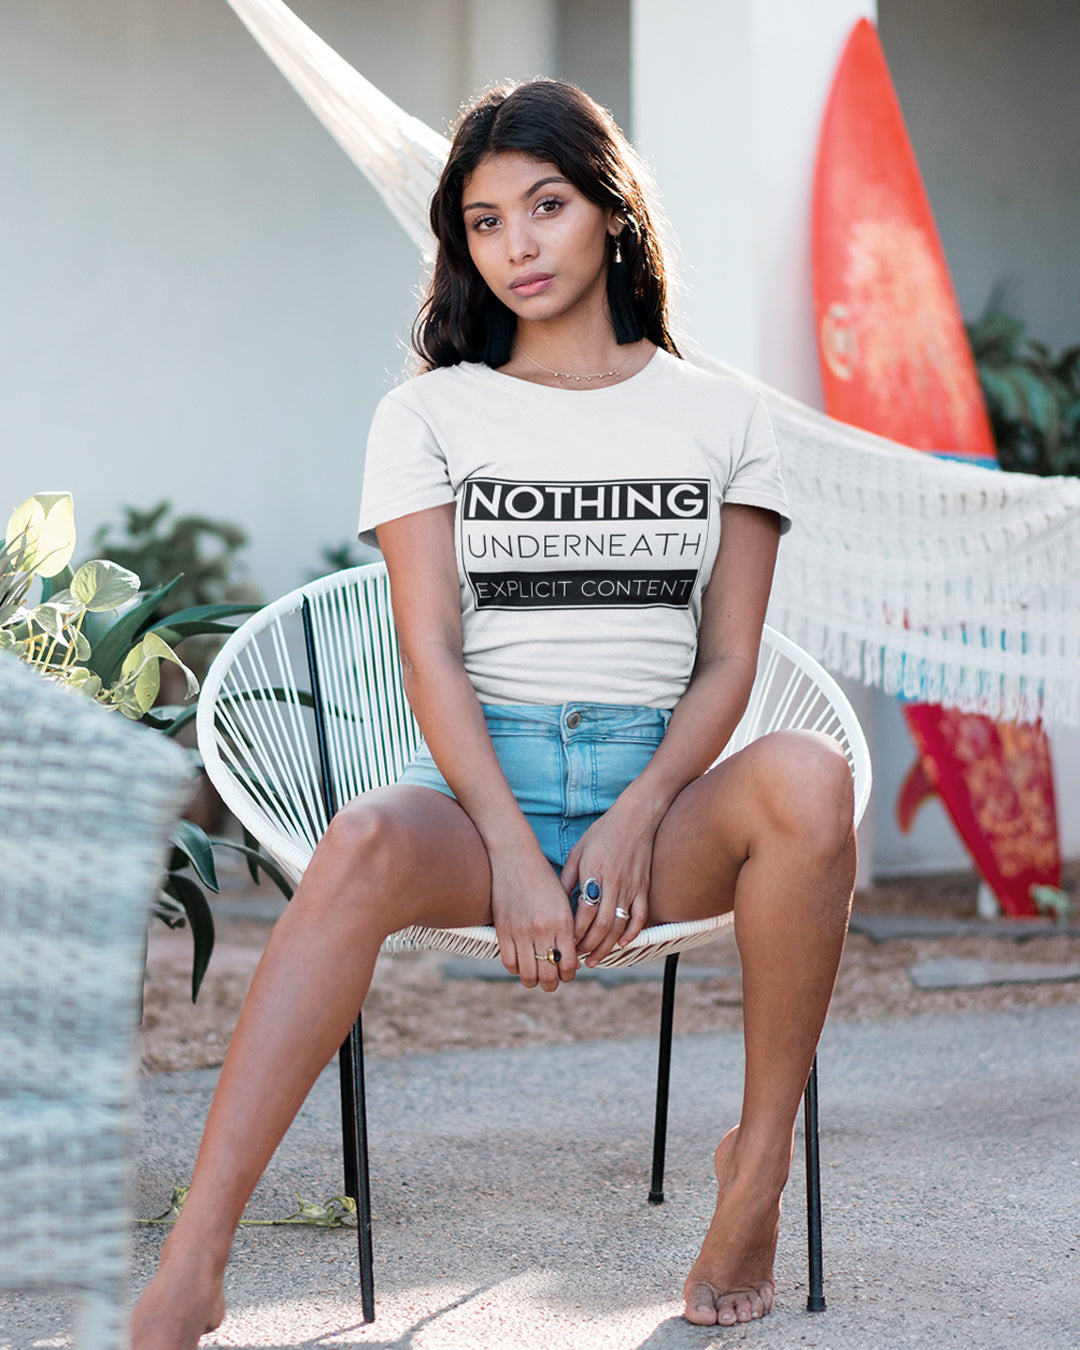 Nothing Underneath Explicit Content - Women's Relaxed White T-Shirt